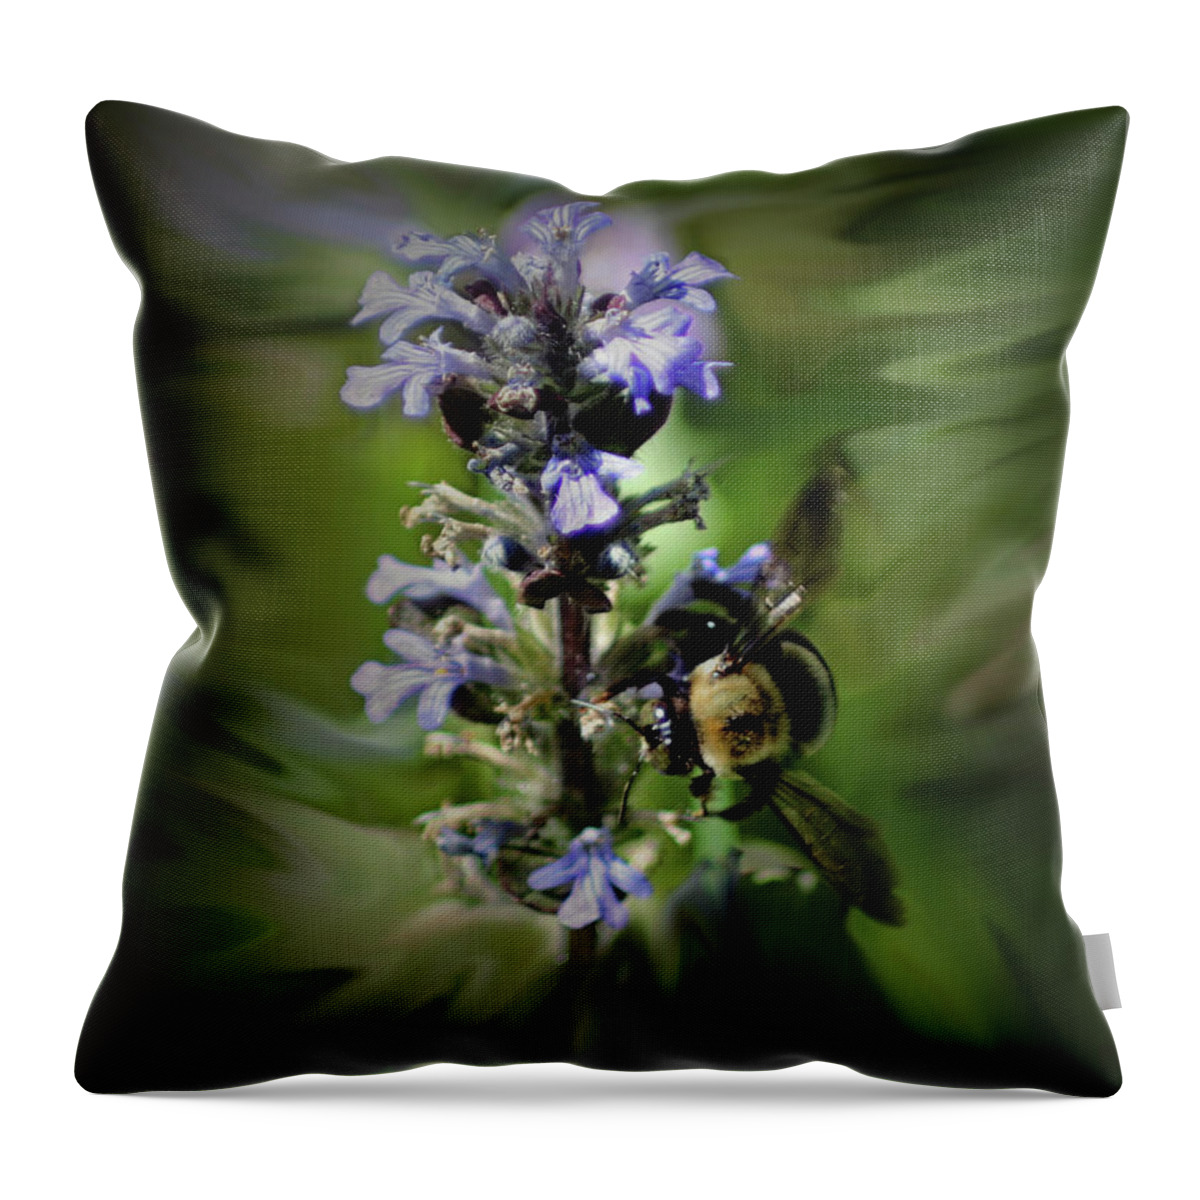 Nature Throw Pillow featuring the photograph Bumble Bee On Flower by Smilin Eyes Treasures